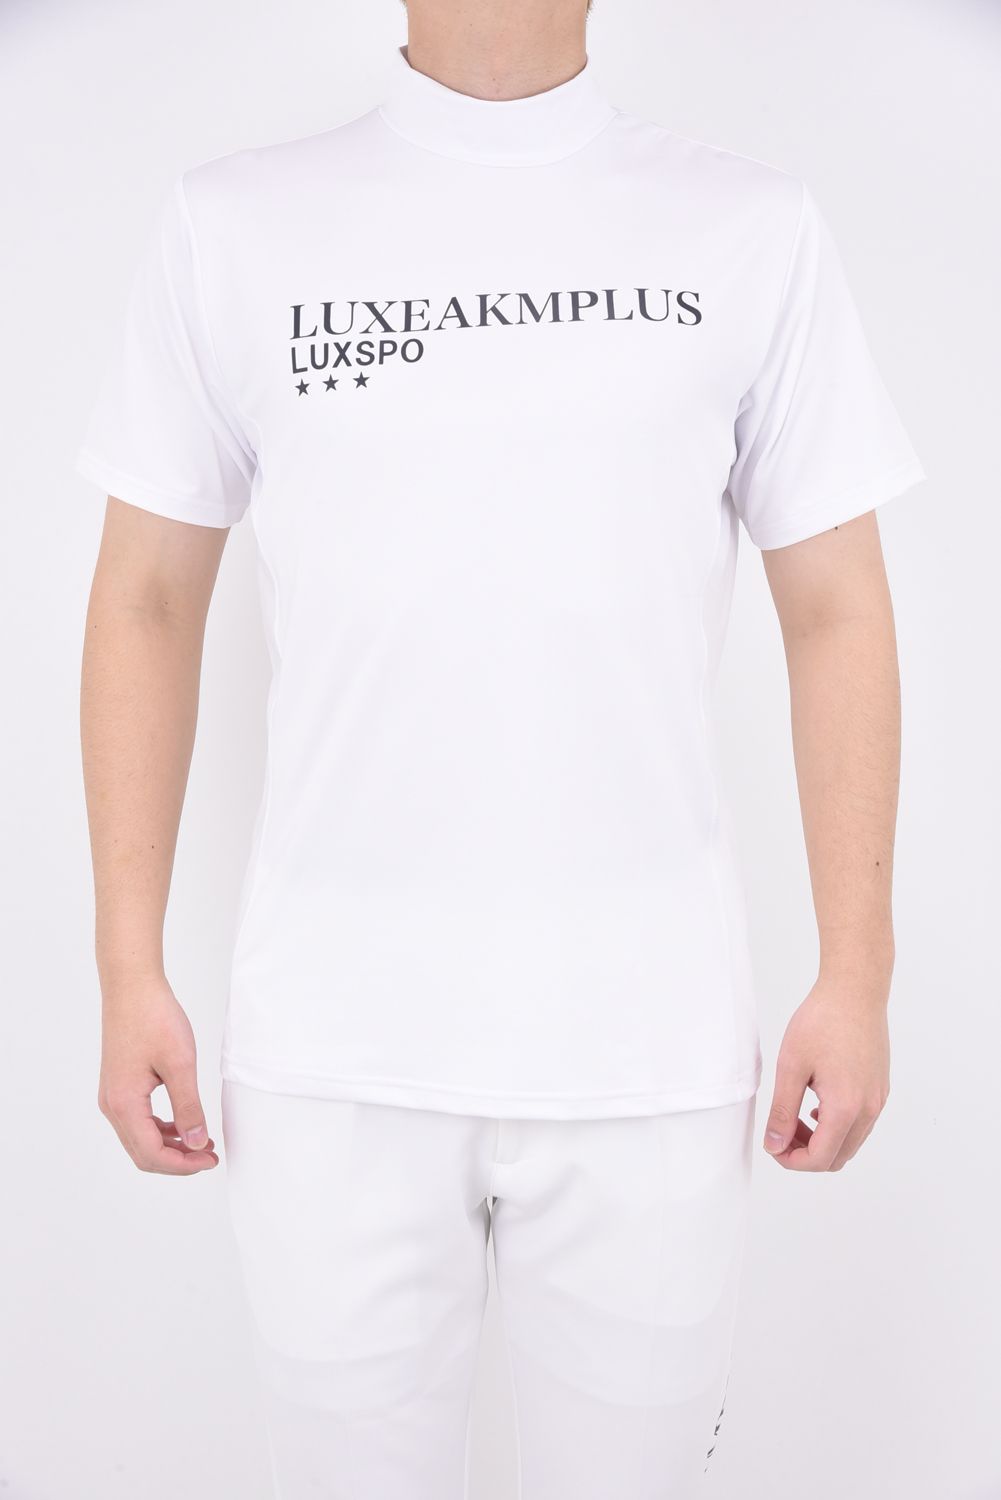 LUXEAKMPLUS - SPORTS LOGO MOCK NECK T-SHIRTS / スポーツロゴ モック 